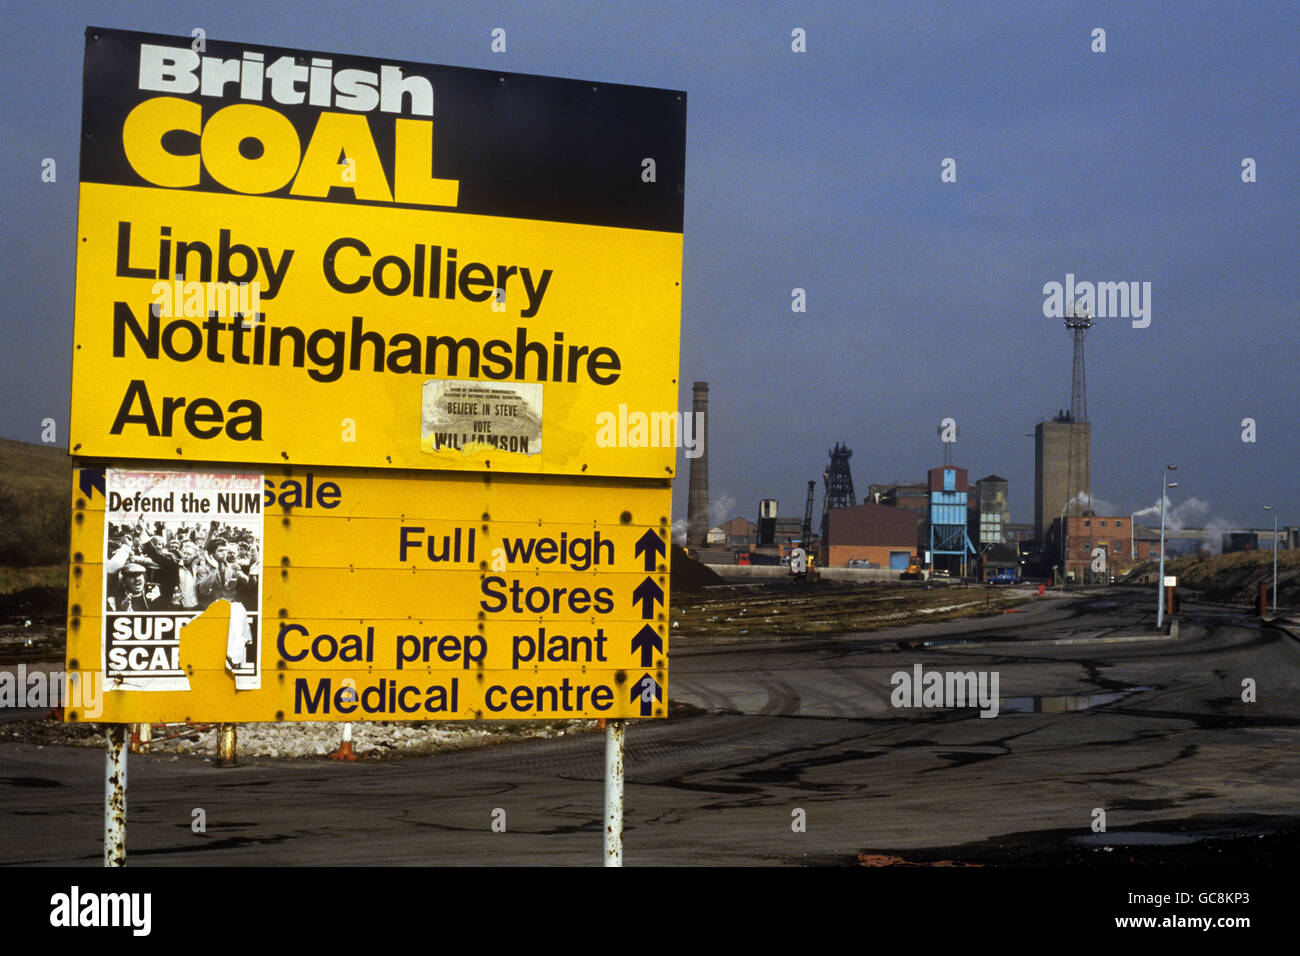 industry-coal-mining-linby-colliery-nott